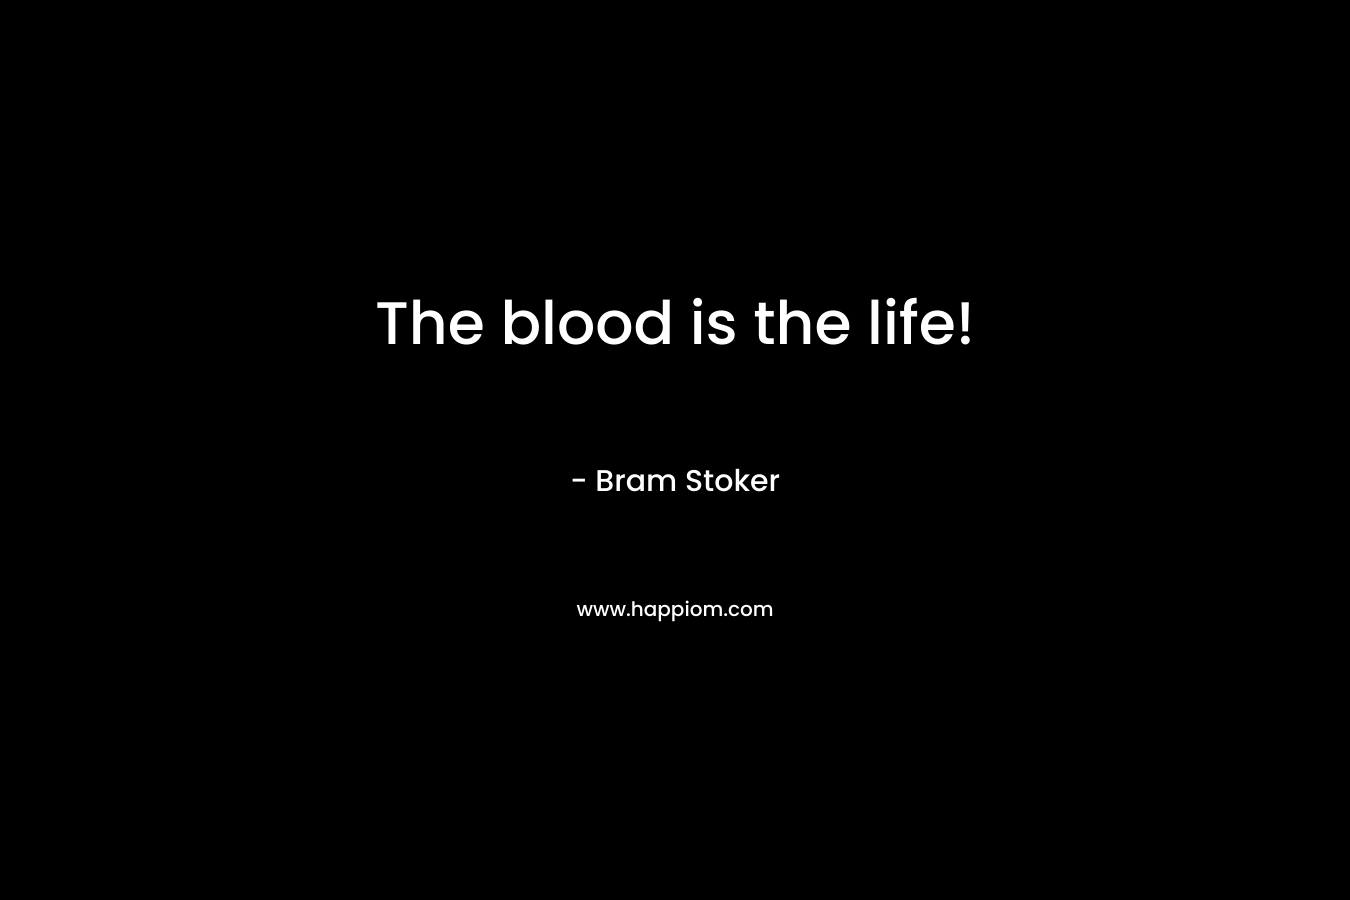 The blood is the life! – Bram Stoker